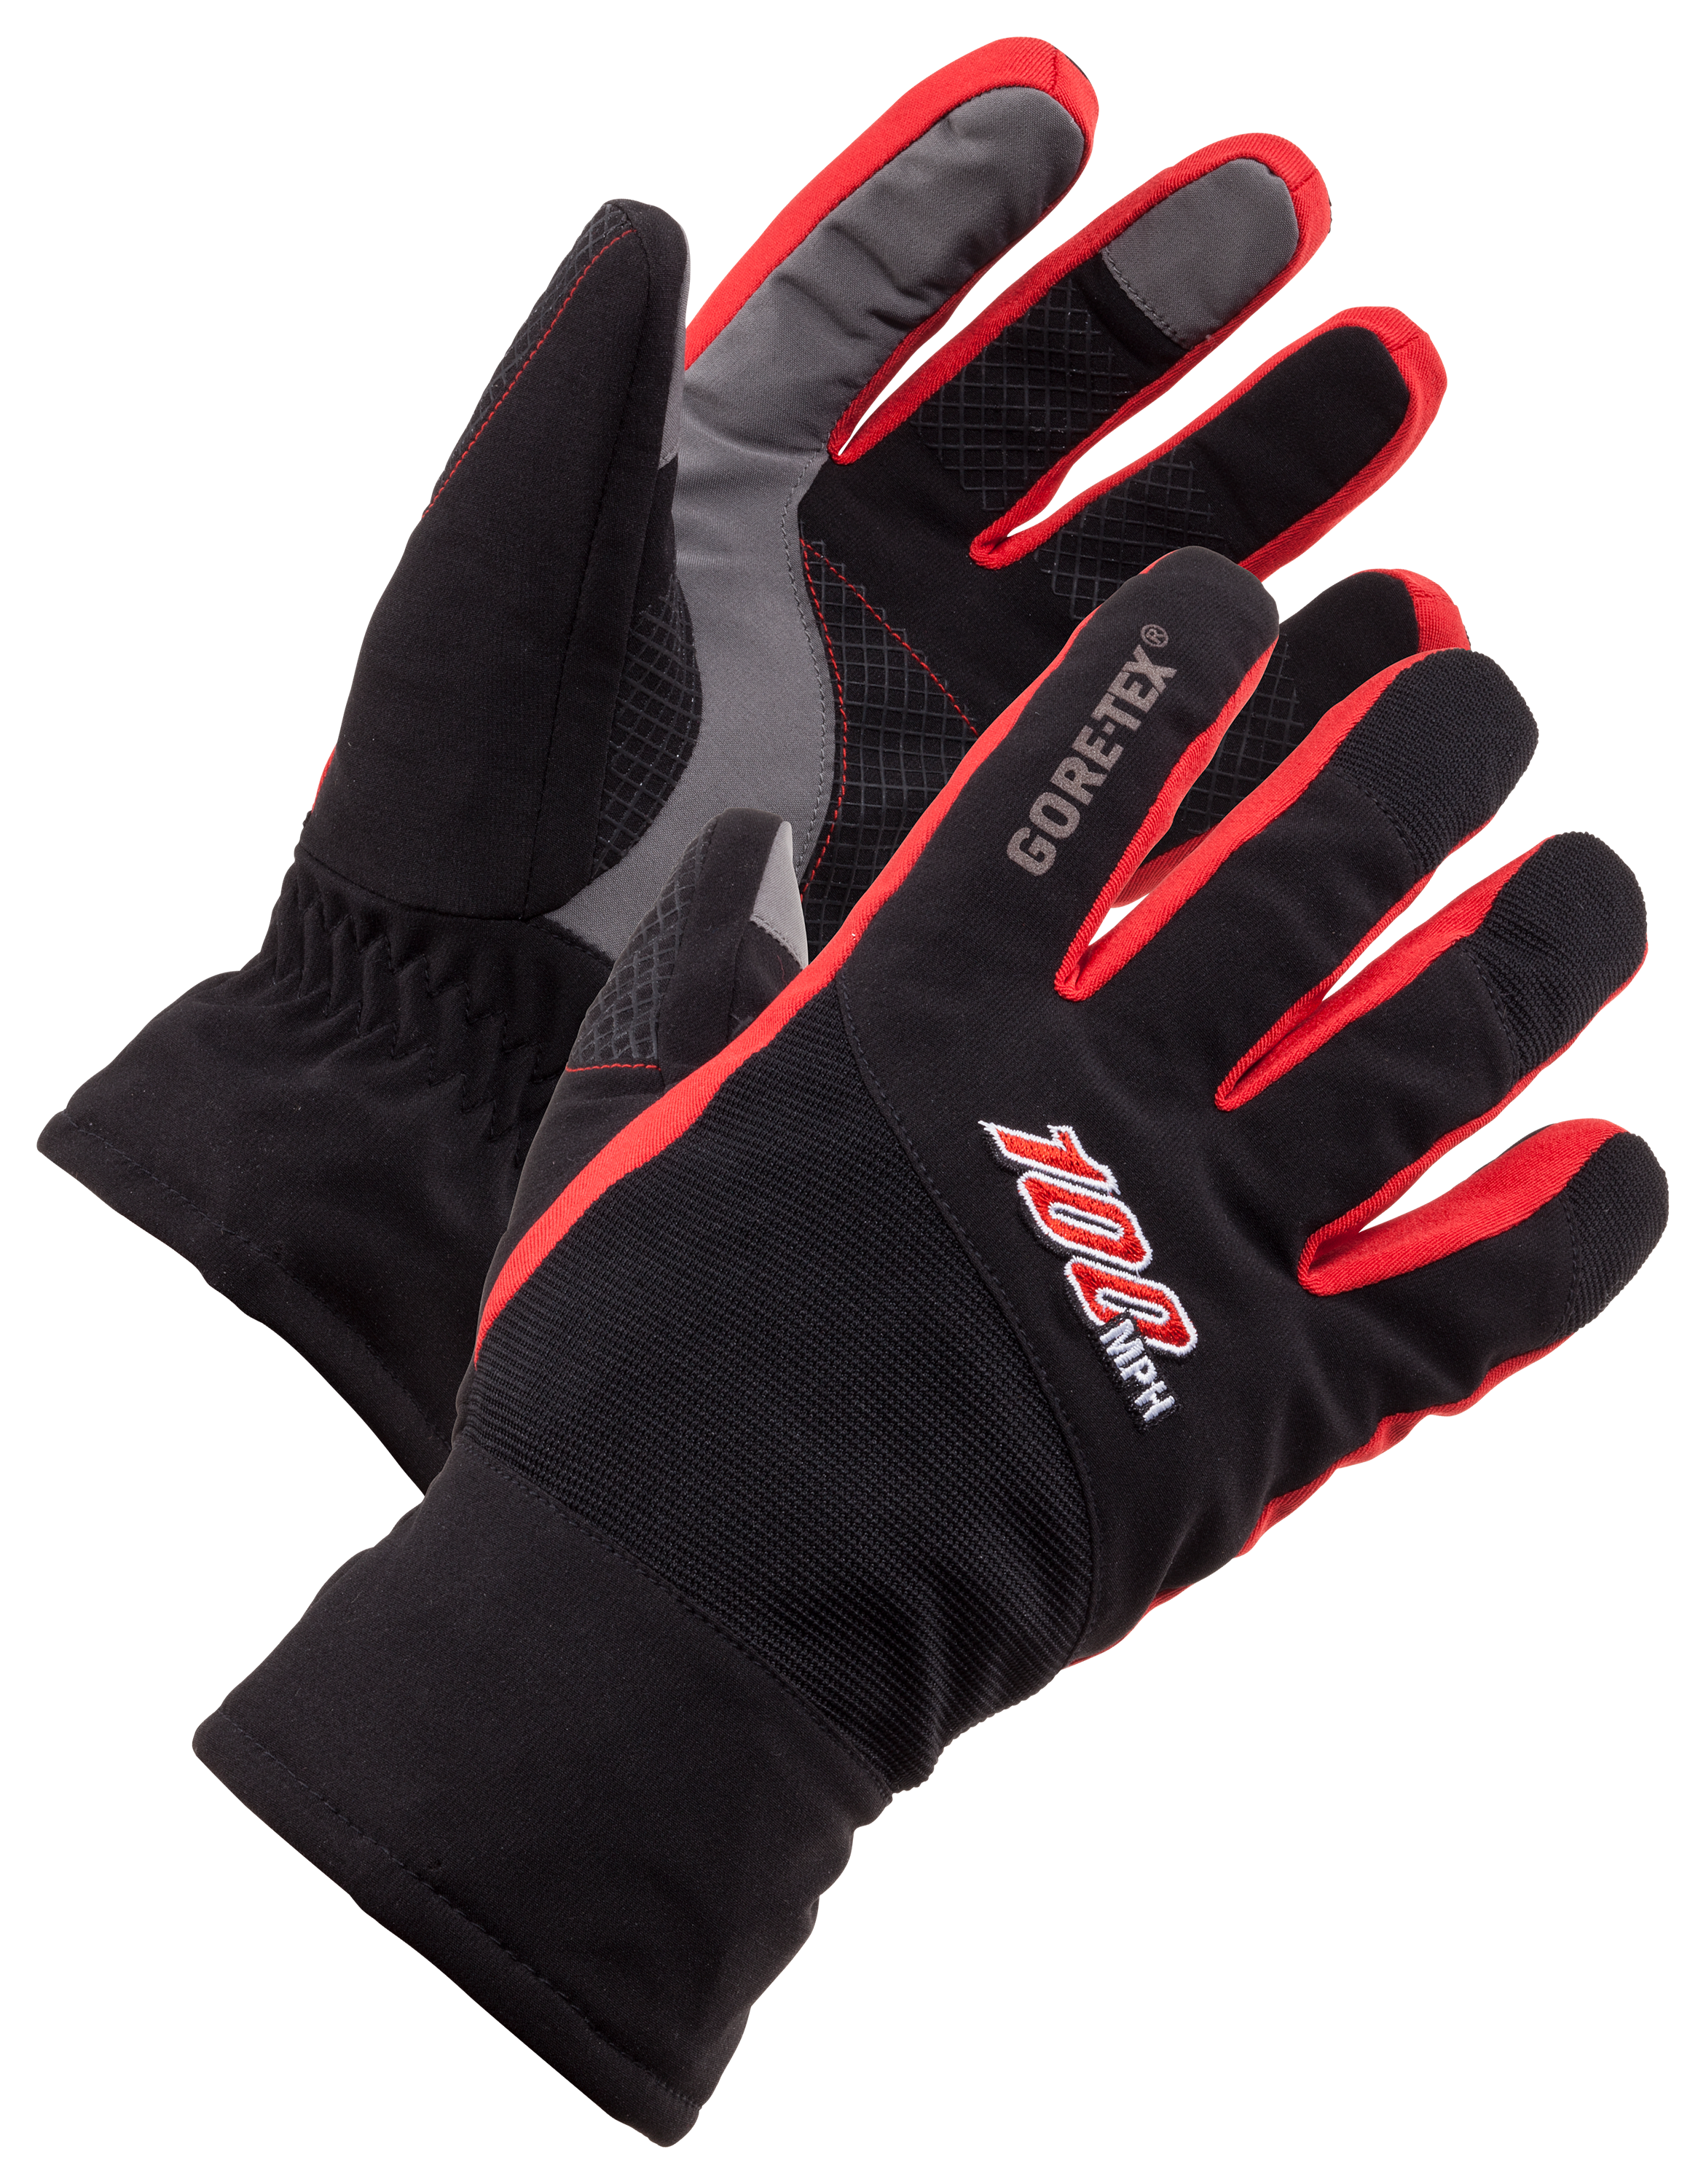 Bass Pro Shops 100 MPH GORE-TEX Insulated Gloves for Men